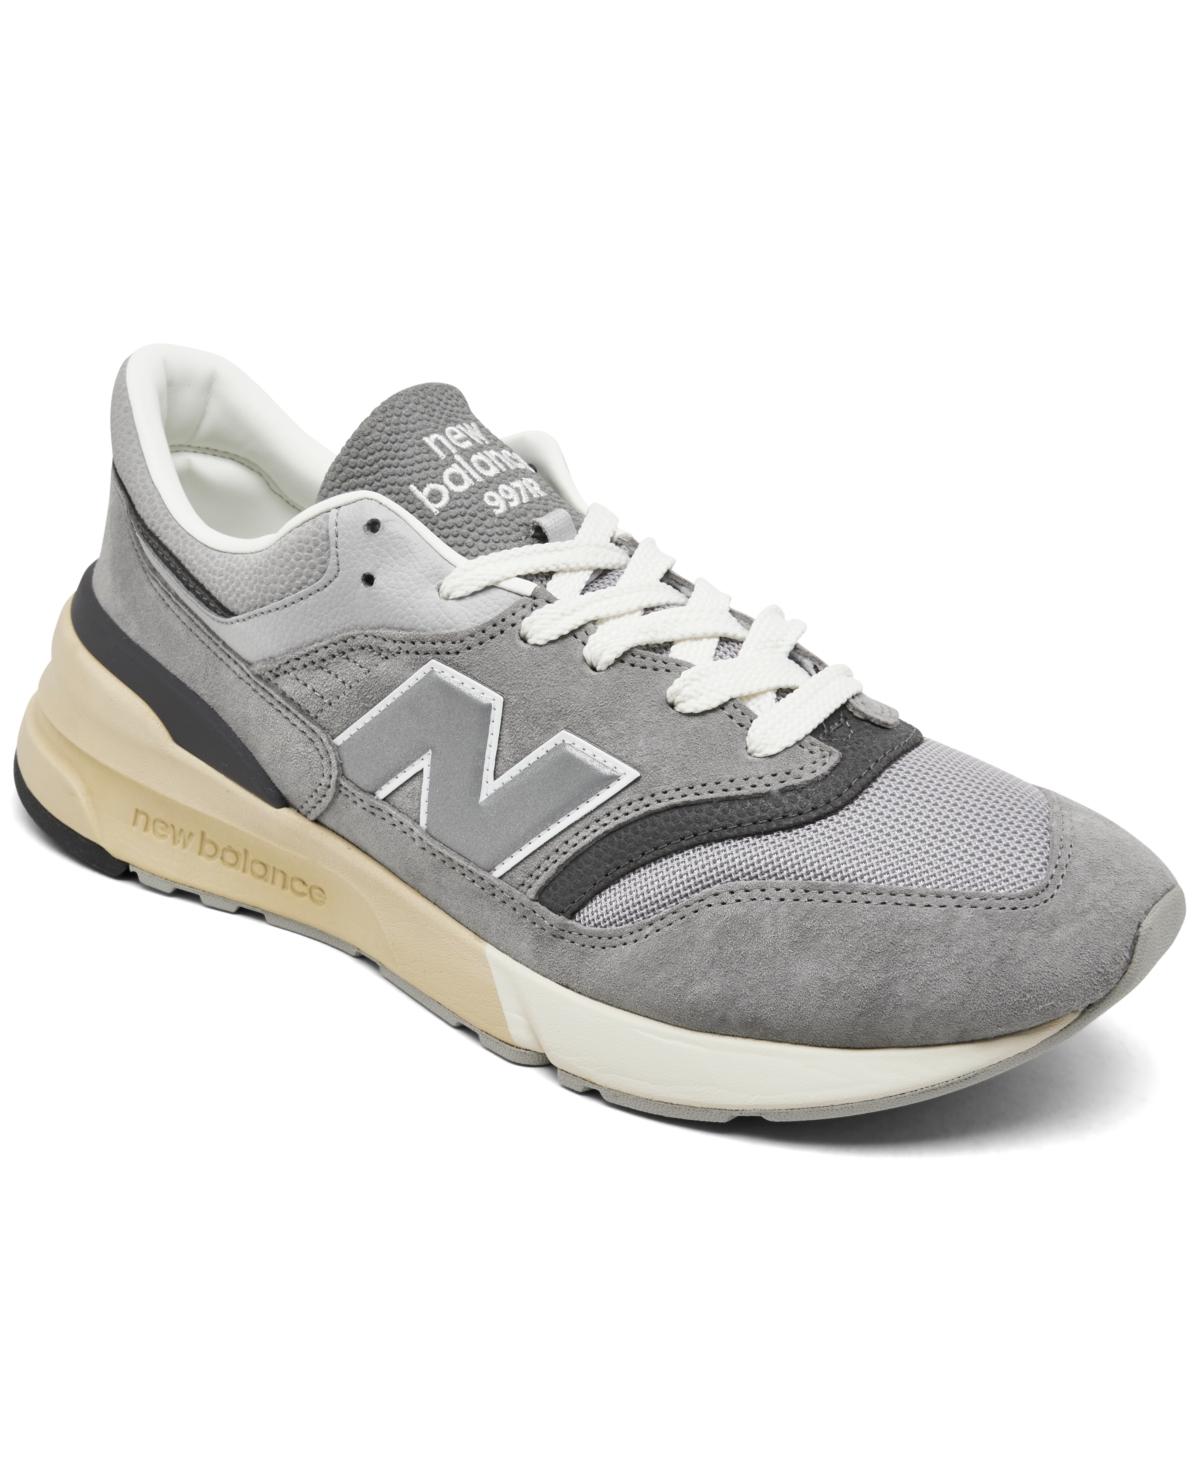 Men's 997R Casual Fashion Sneakers from Finish Line - Shadow Grey